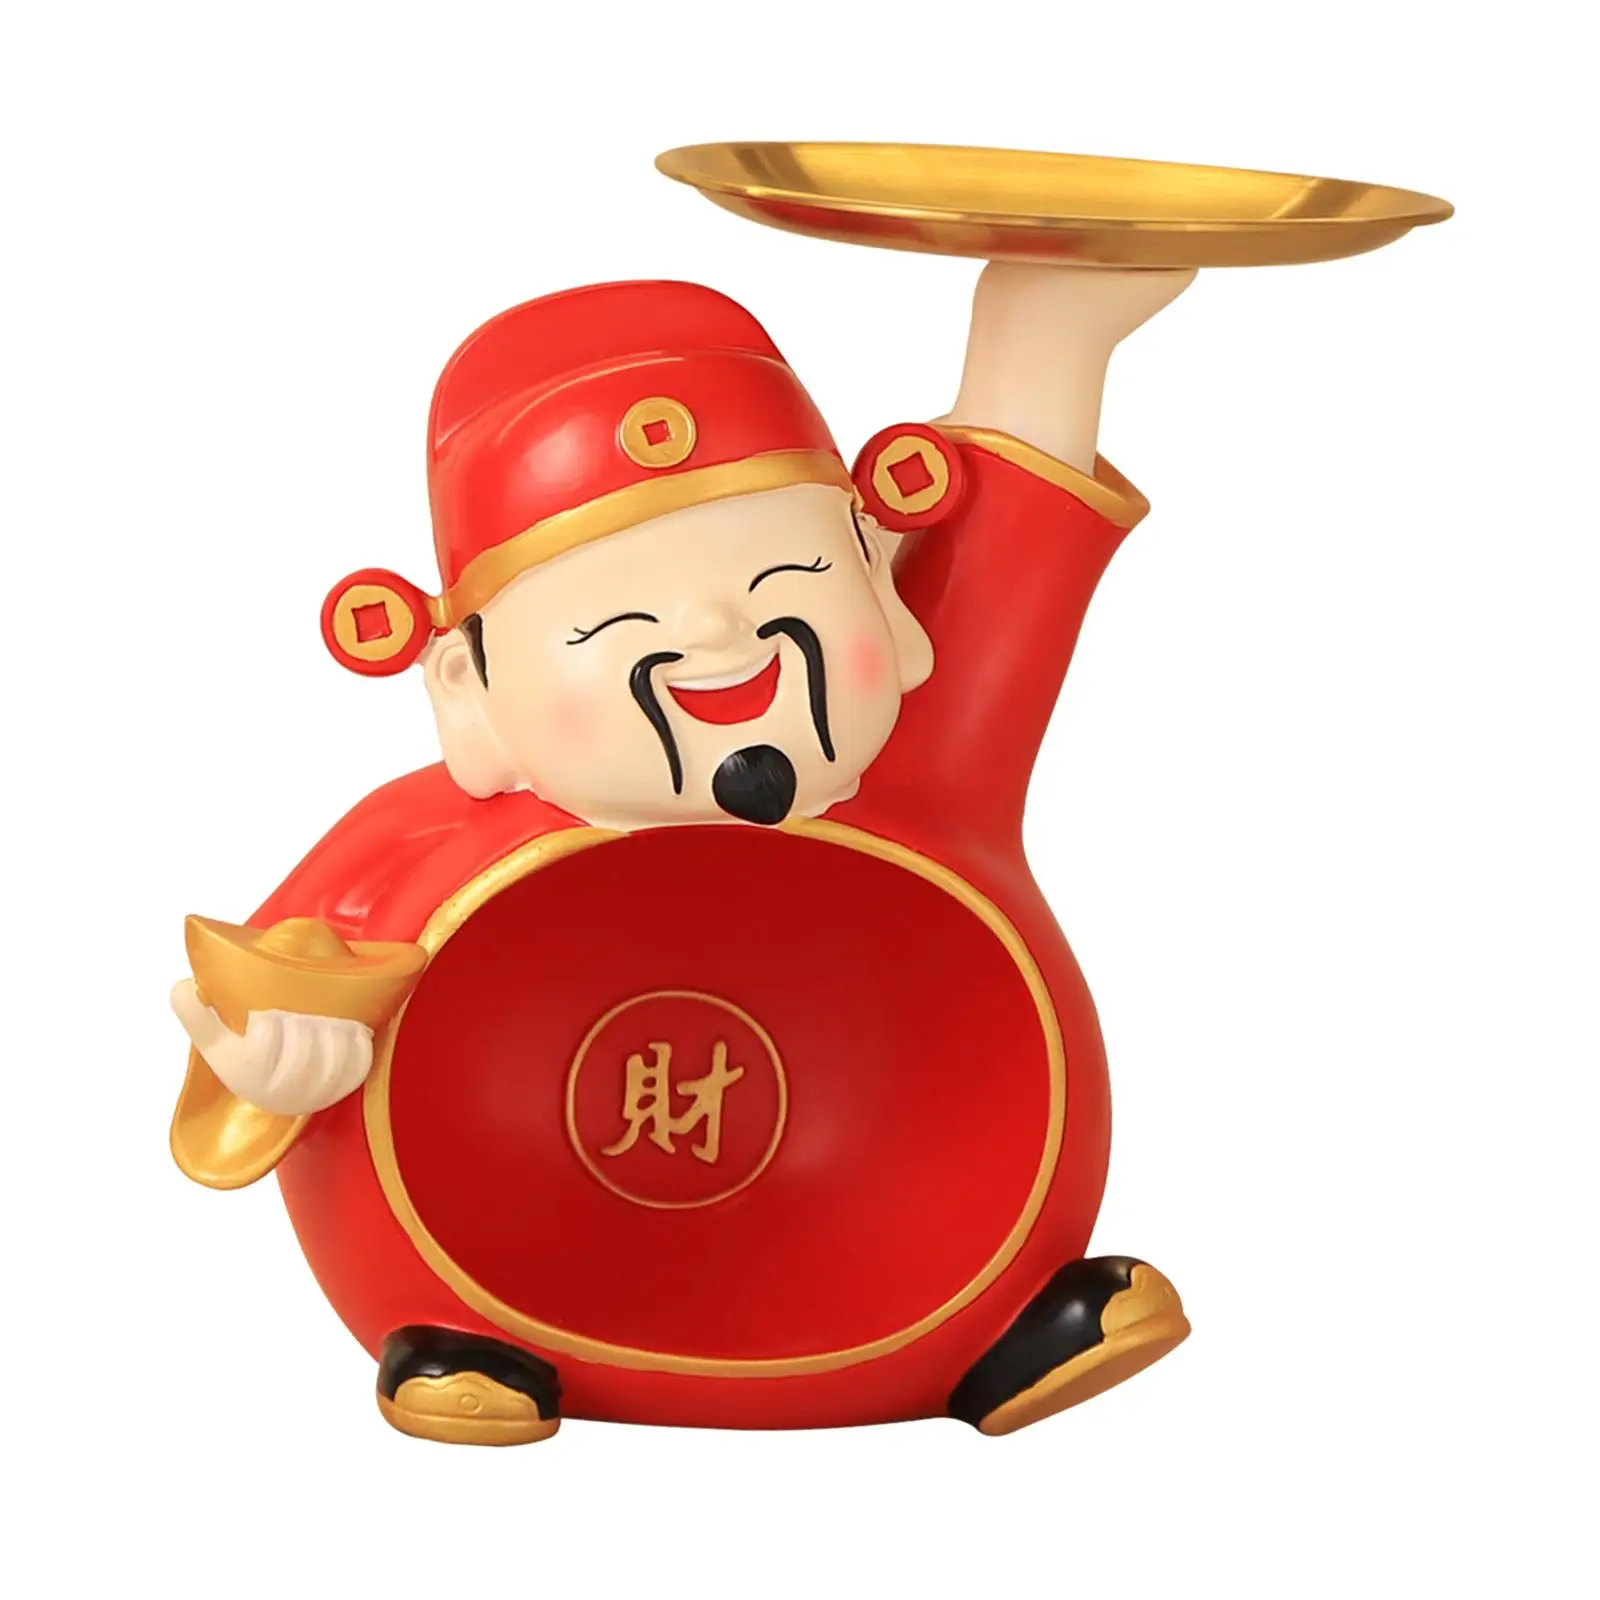 God of Fortune Figurine Sculpture Creative Storage Tray Resin Candy Bowl